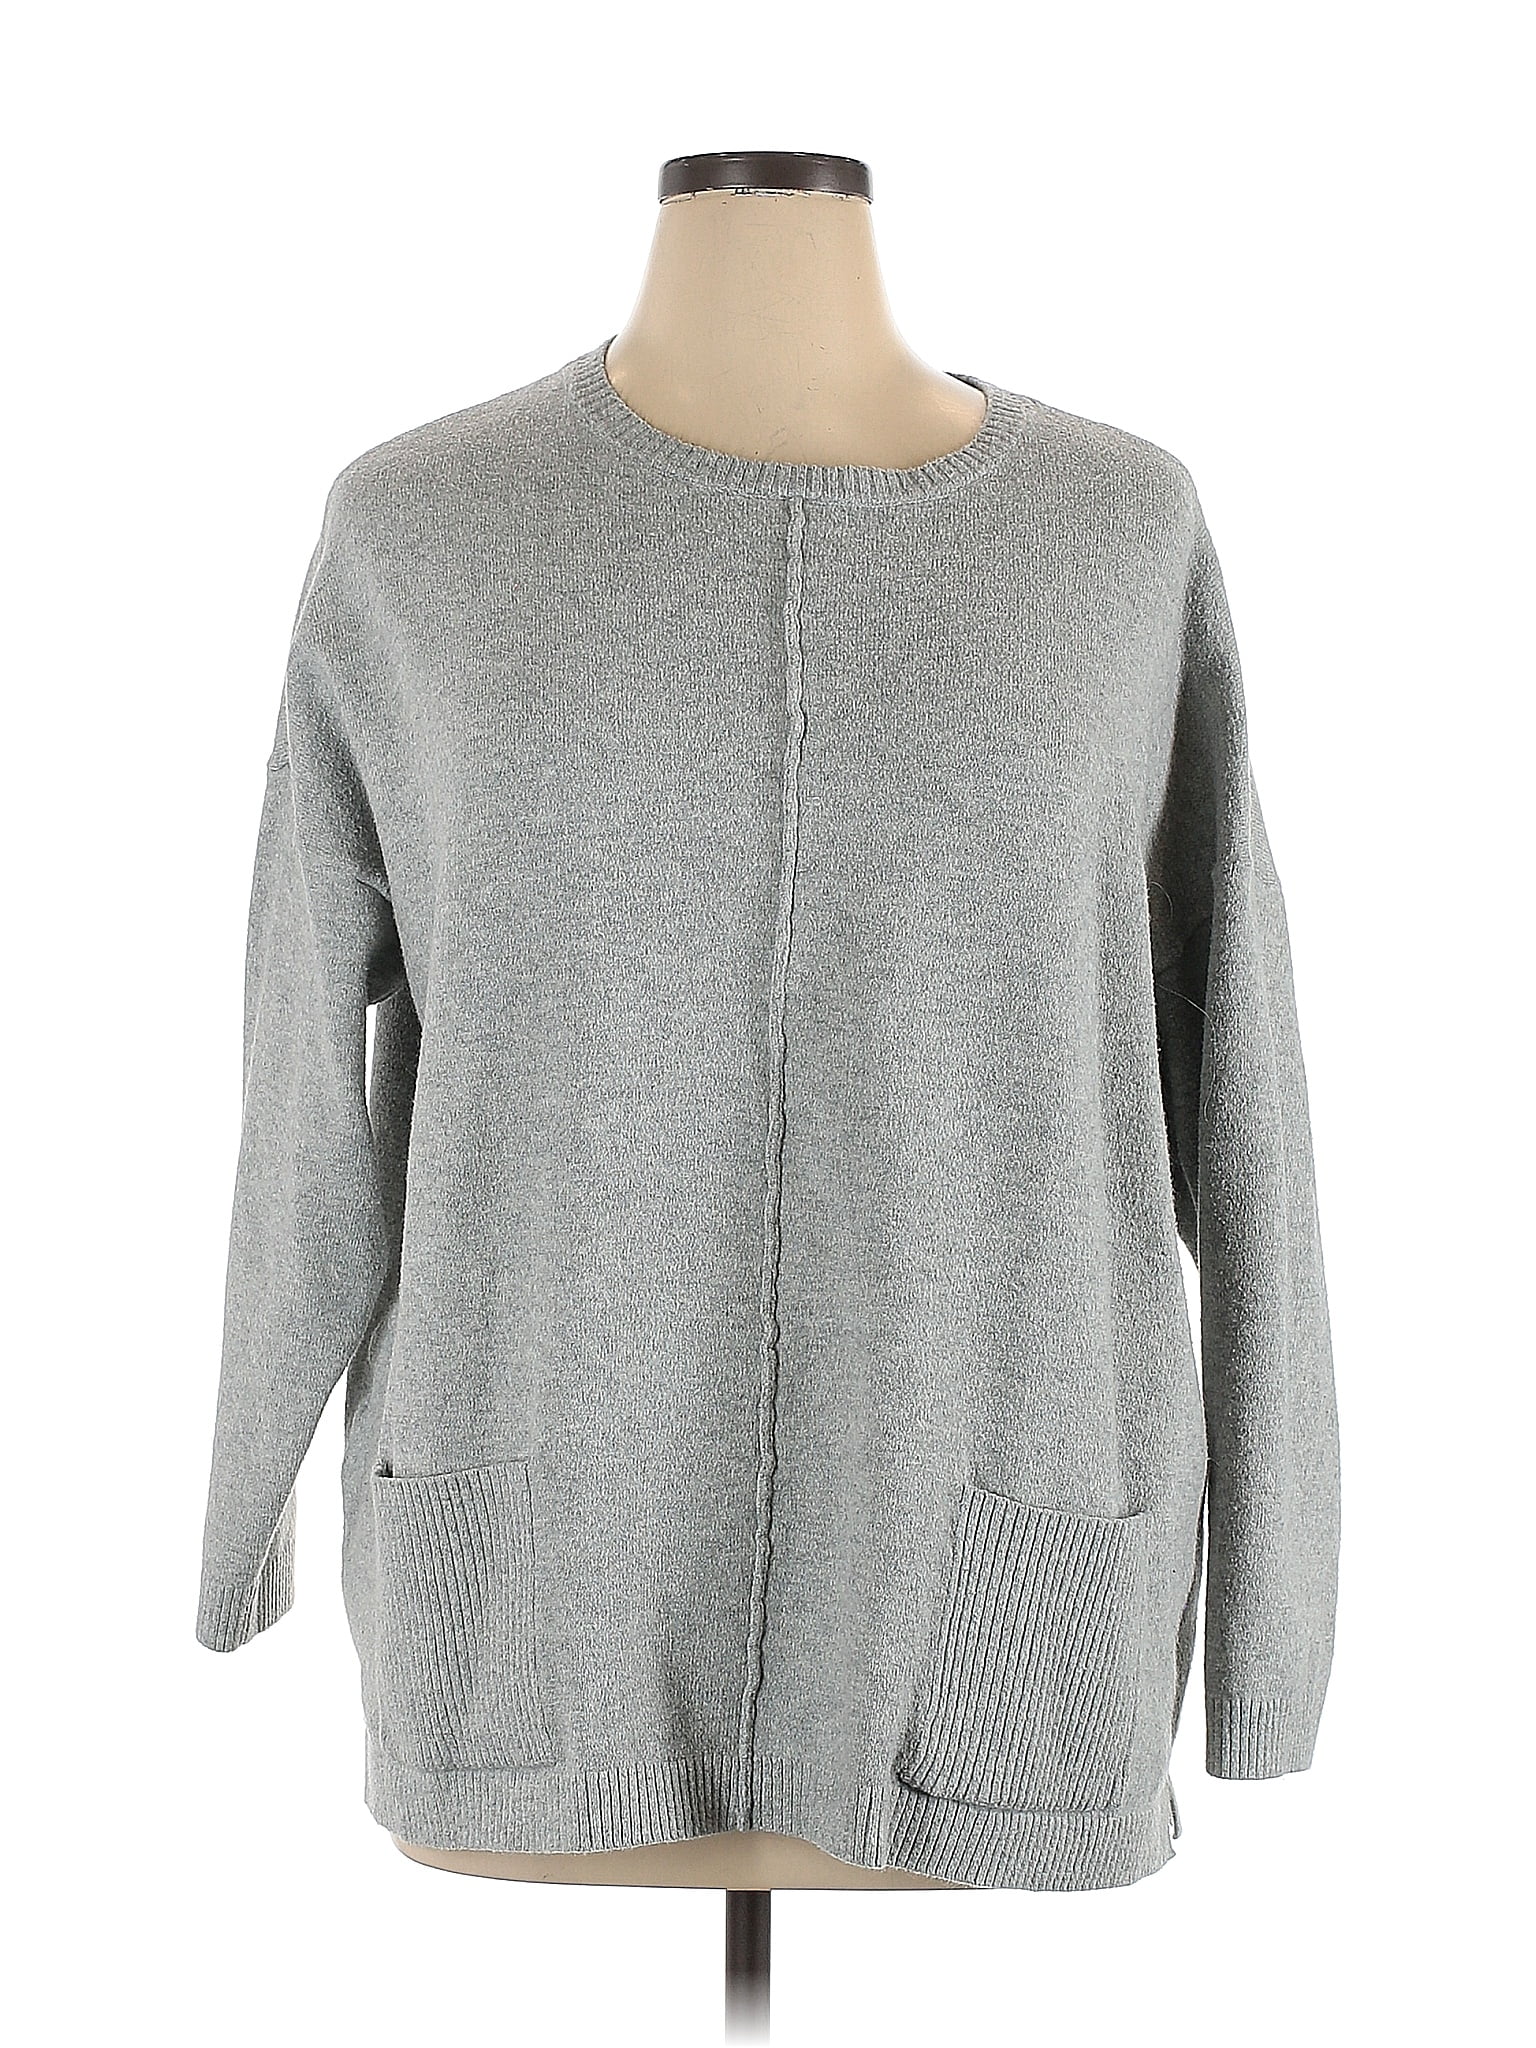 J.Jill Color Block Solid Gray Pullover Sweater Size XL - 68% off | thredUP